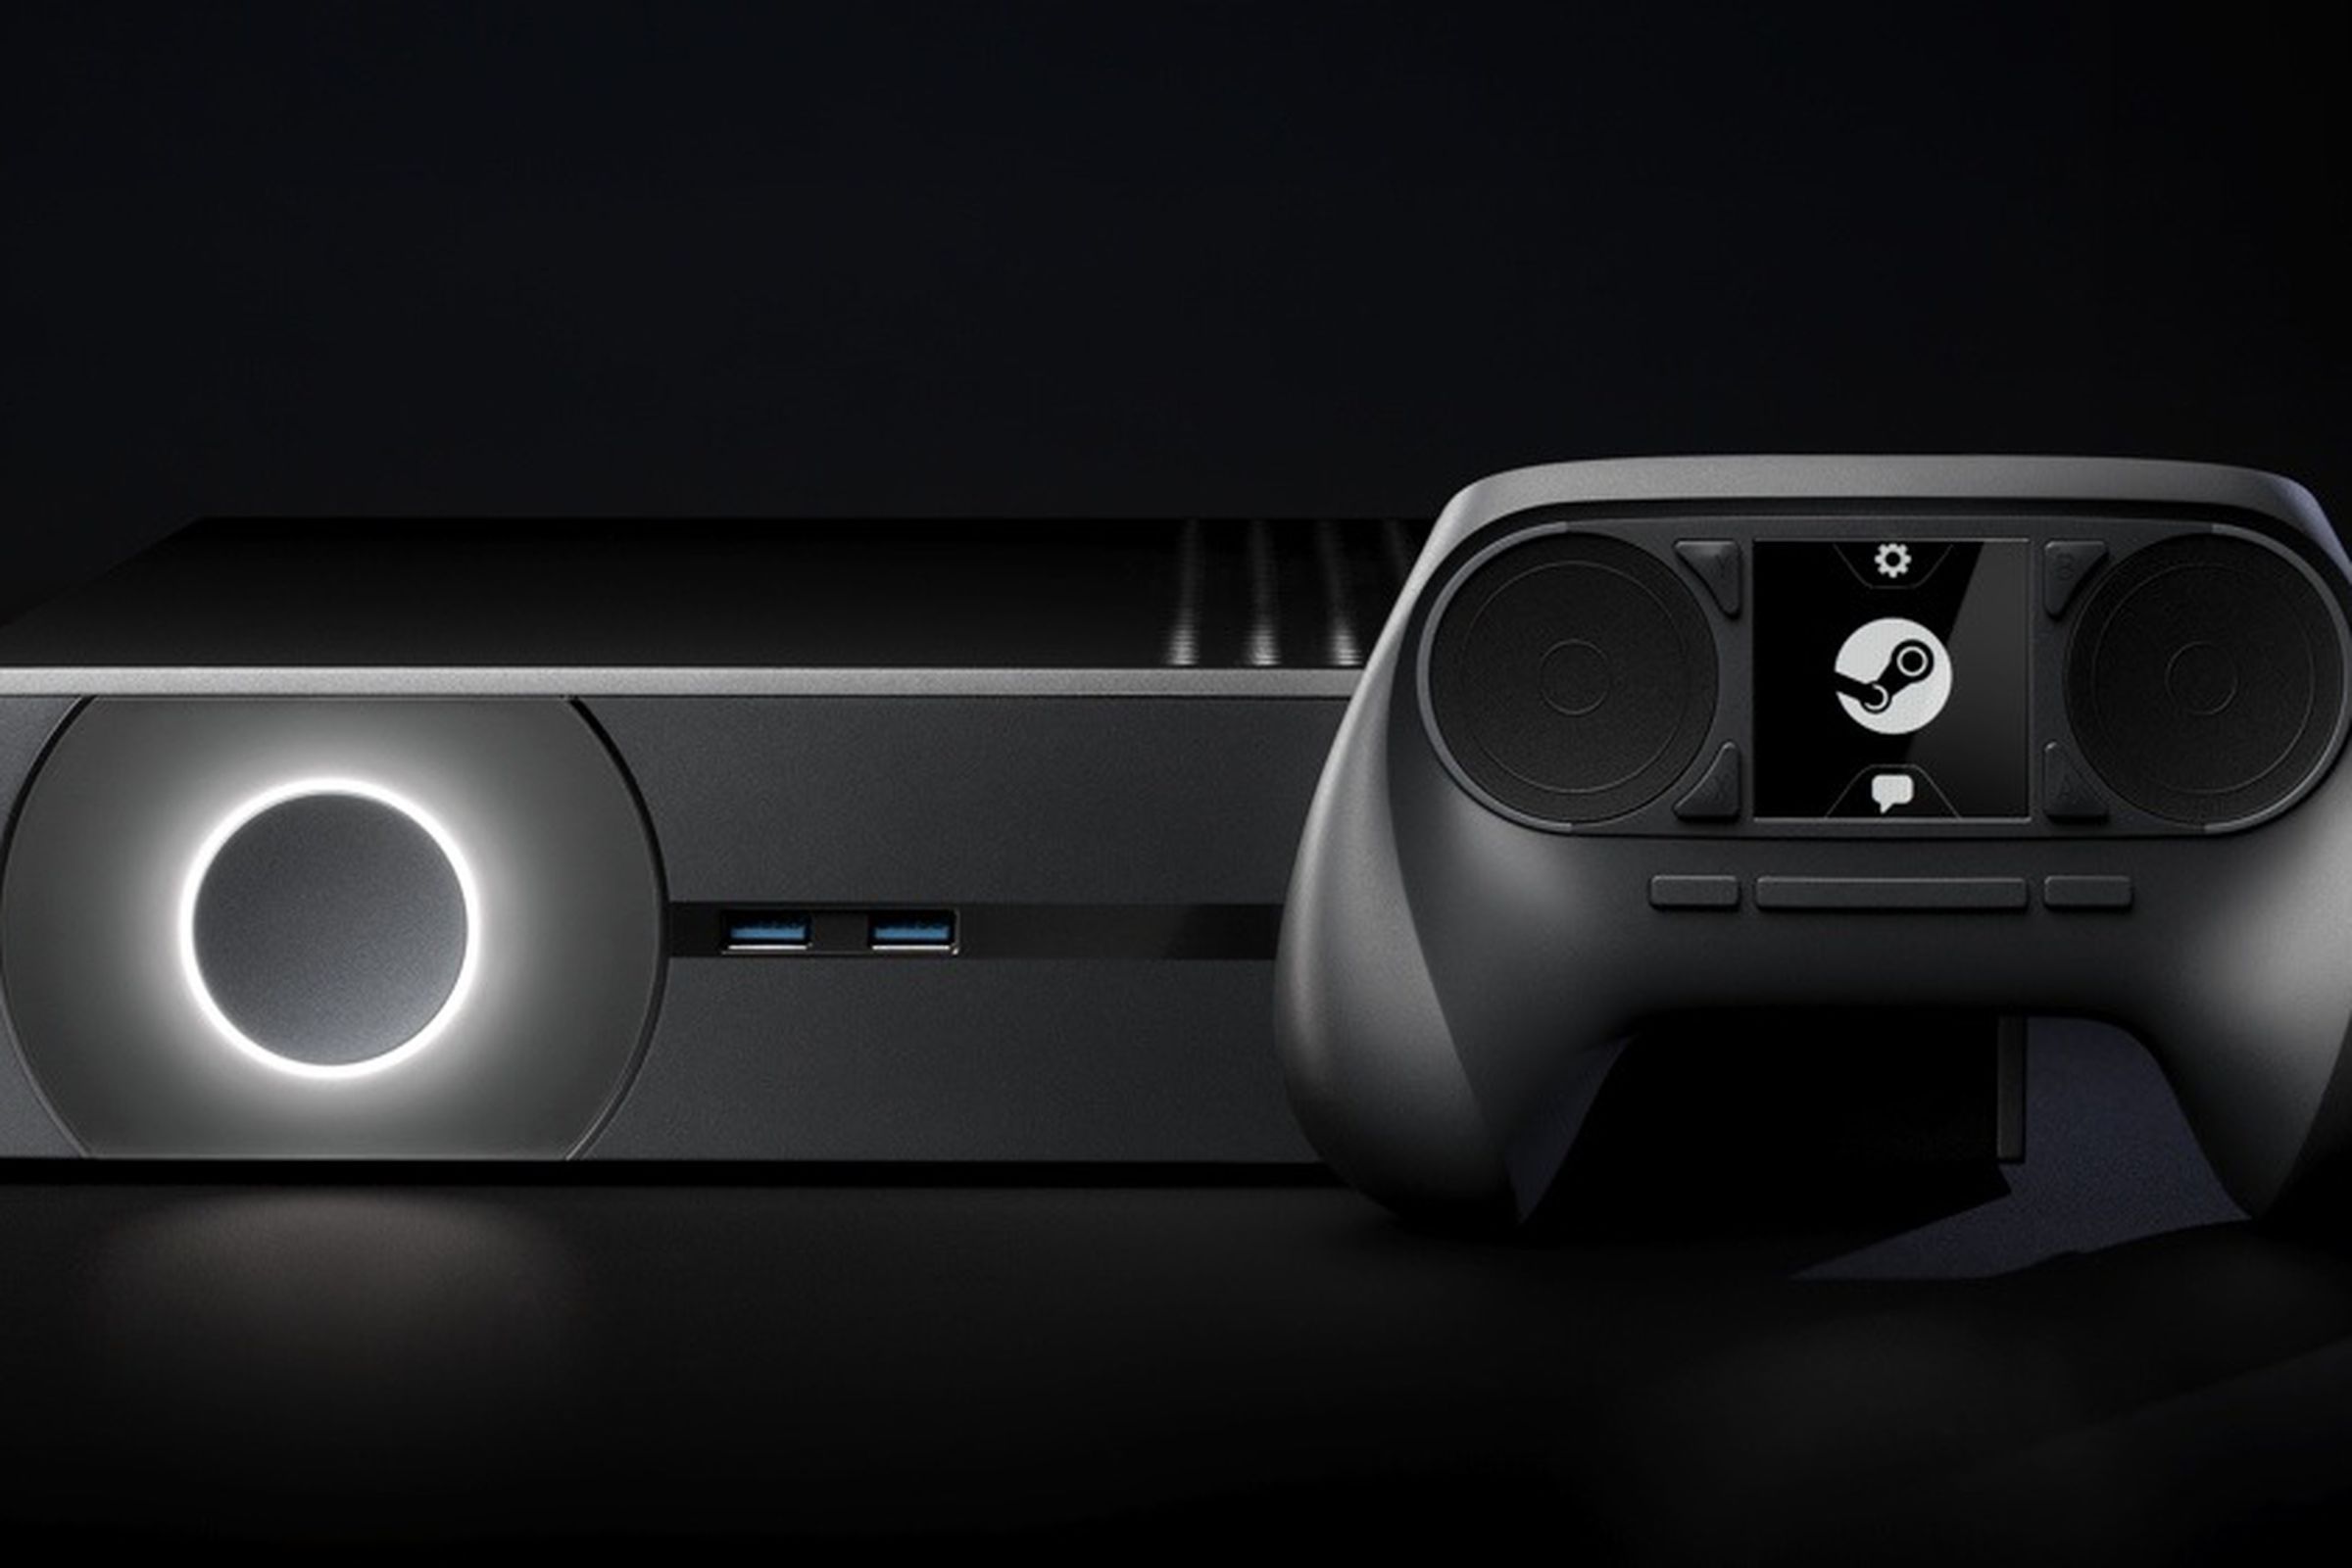 Gallery Photo: Steam Controller and Steam Machine press pictures